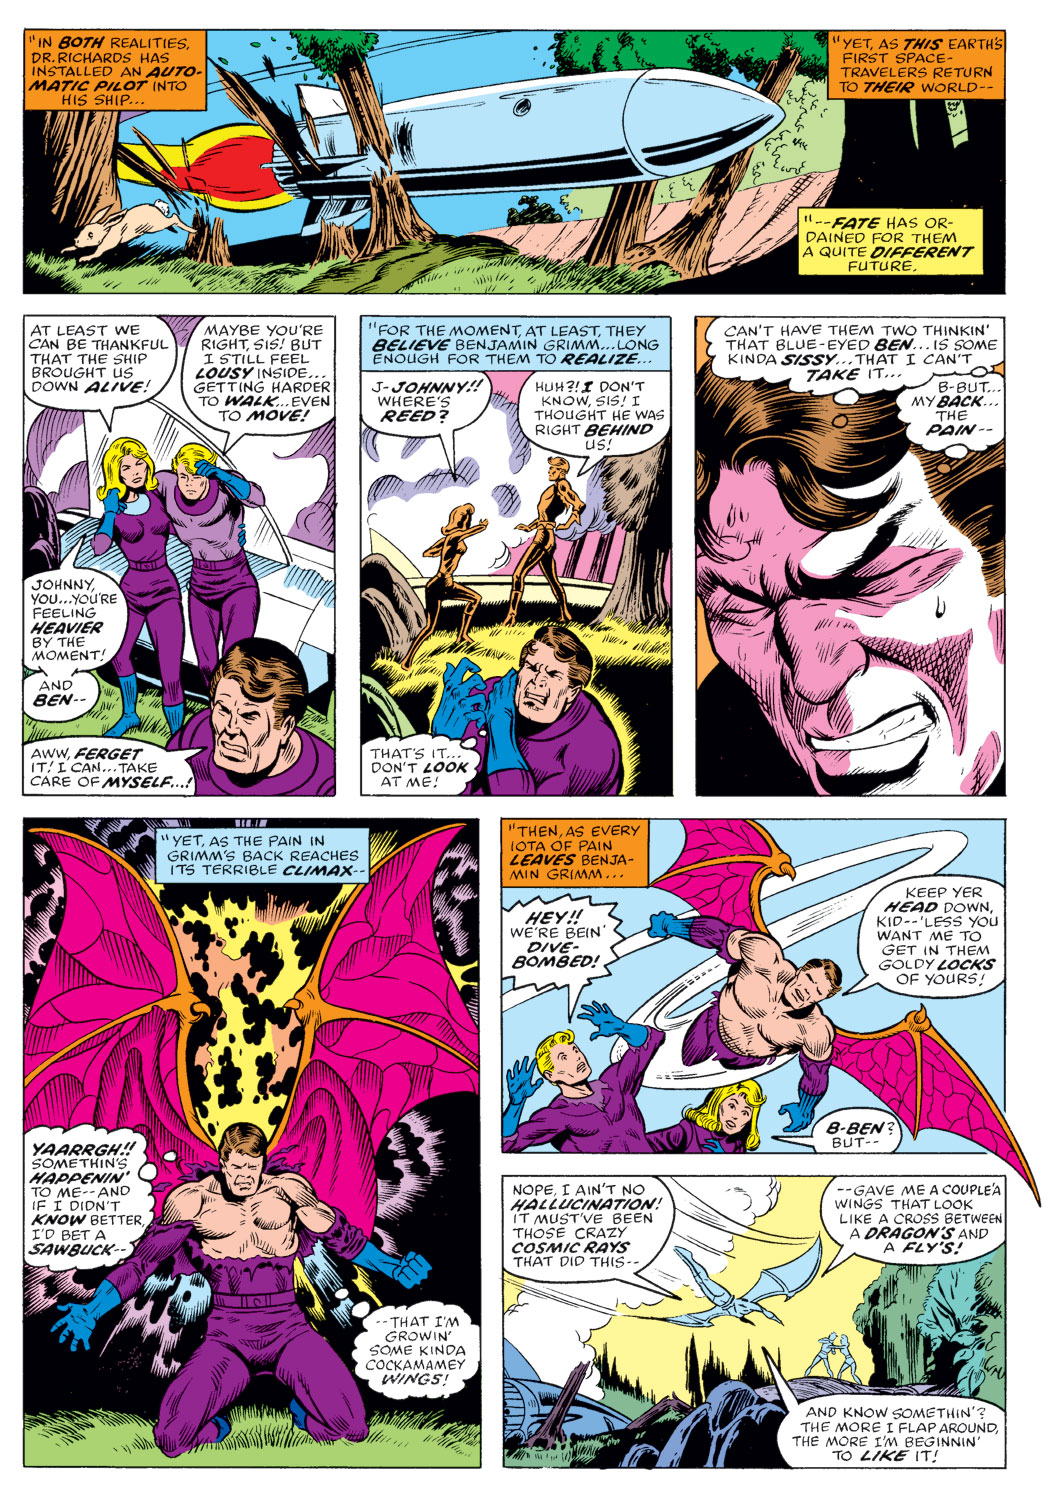 What If? (1977) issue 6 - The Fantastic Four had different superpowers - Page 11